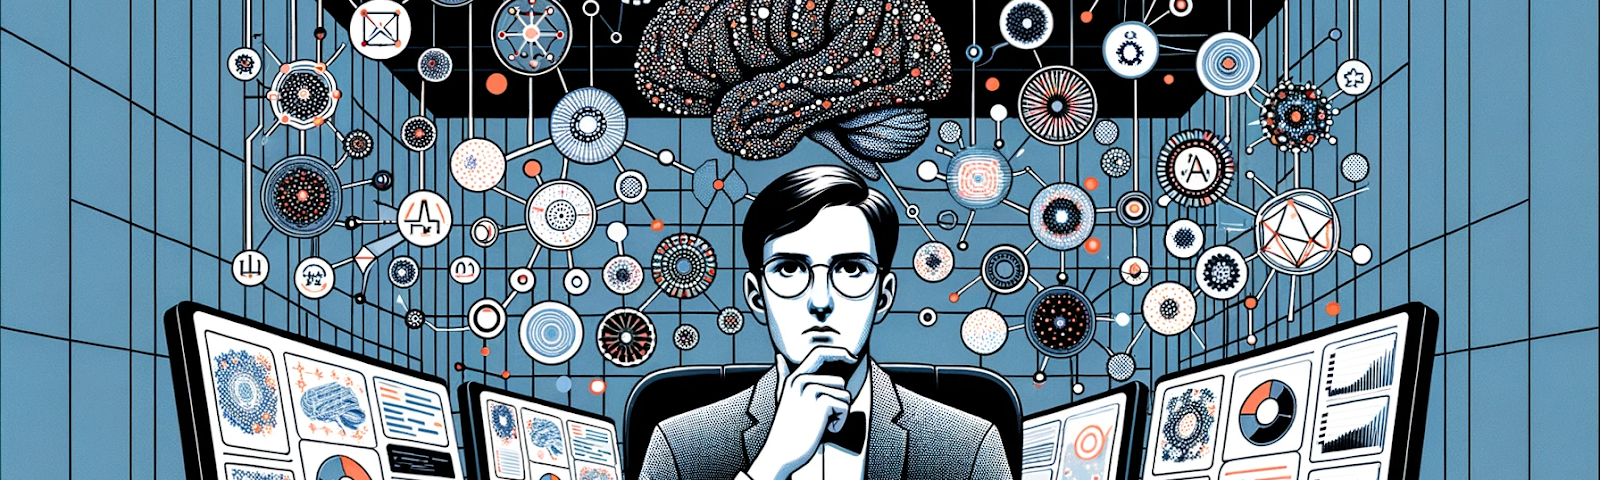 Illustration of an individual with medium skin tone sitting at a desk with four computer monitors displaying various graphs and data visualizations. The person is wearing a dark suit, white shirt, and glasses, with their right hand resting on their chin in a thoughtful pose. Behind them, a stylized brain floats with numerous interconnected icons and symbols representing different thoughts or concepts, all set against a dark blue background with a grid pattern.